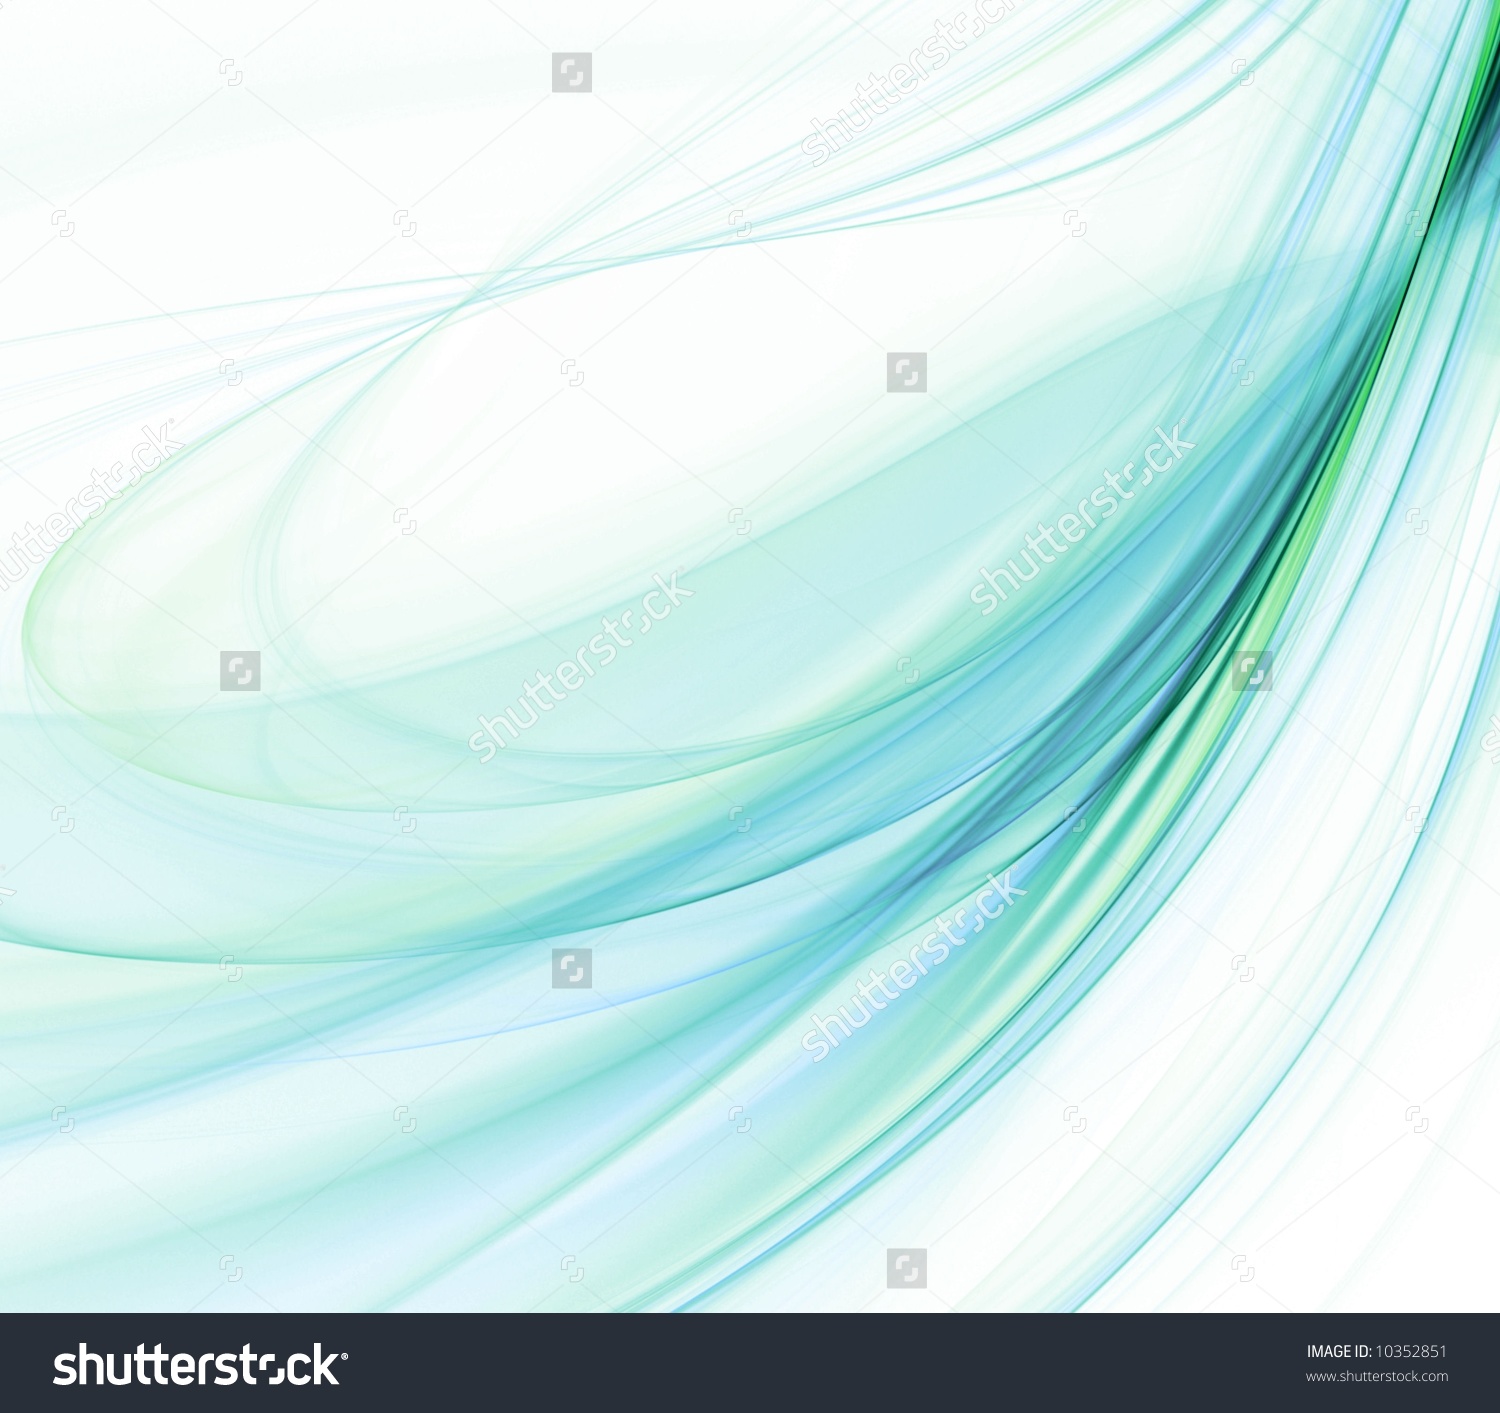 Flowing Light Colored Sheer Fabric Texture Stock Illustration.